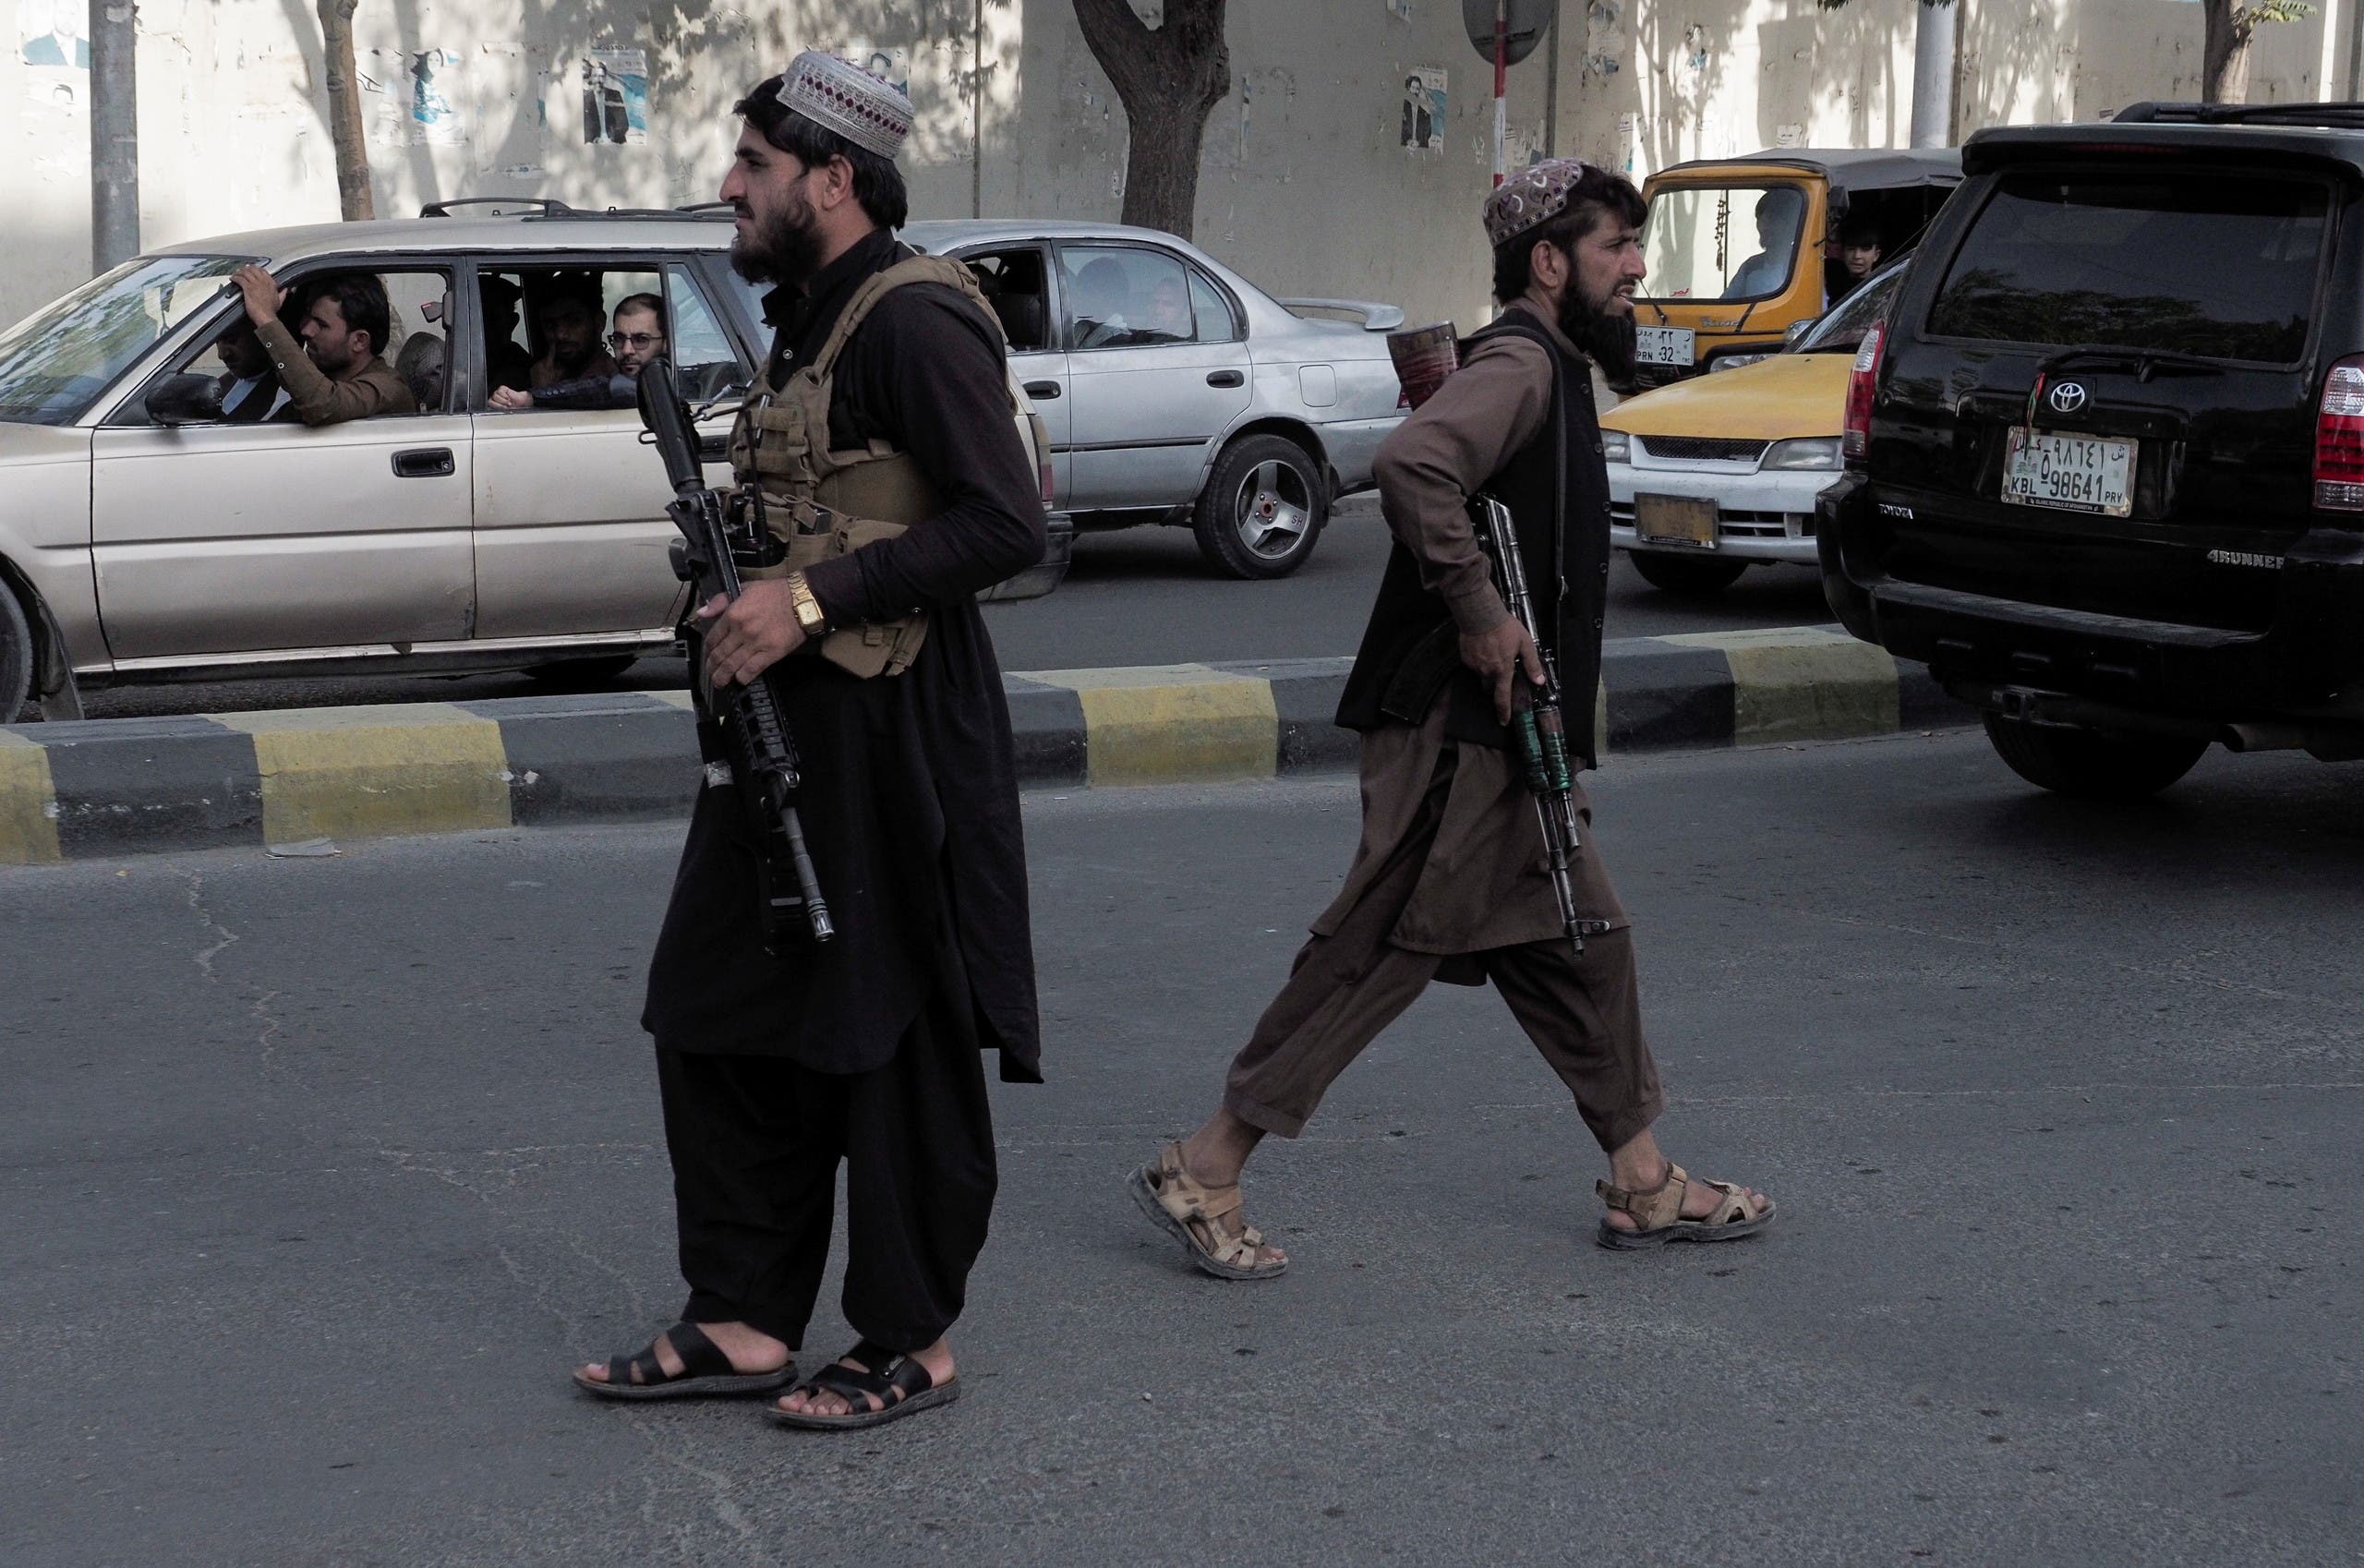 Taliban fighters on a street in Kabul (Reuters archive)